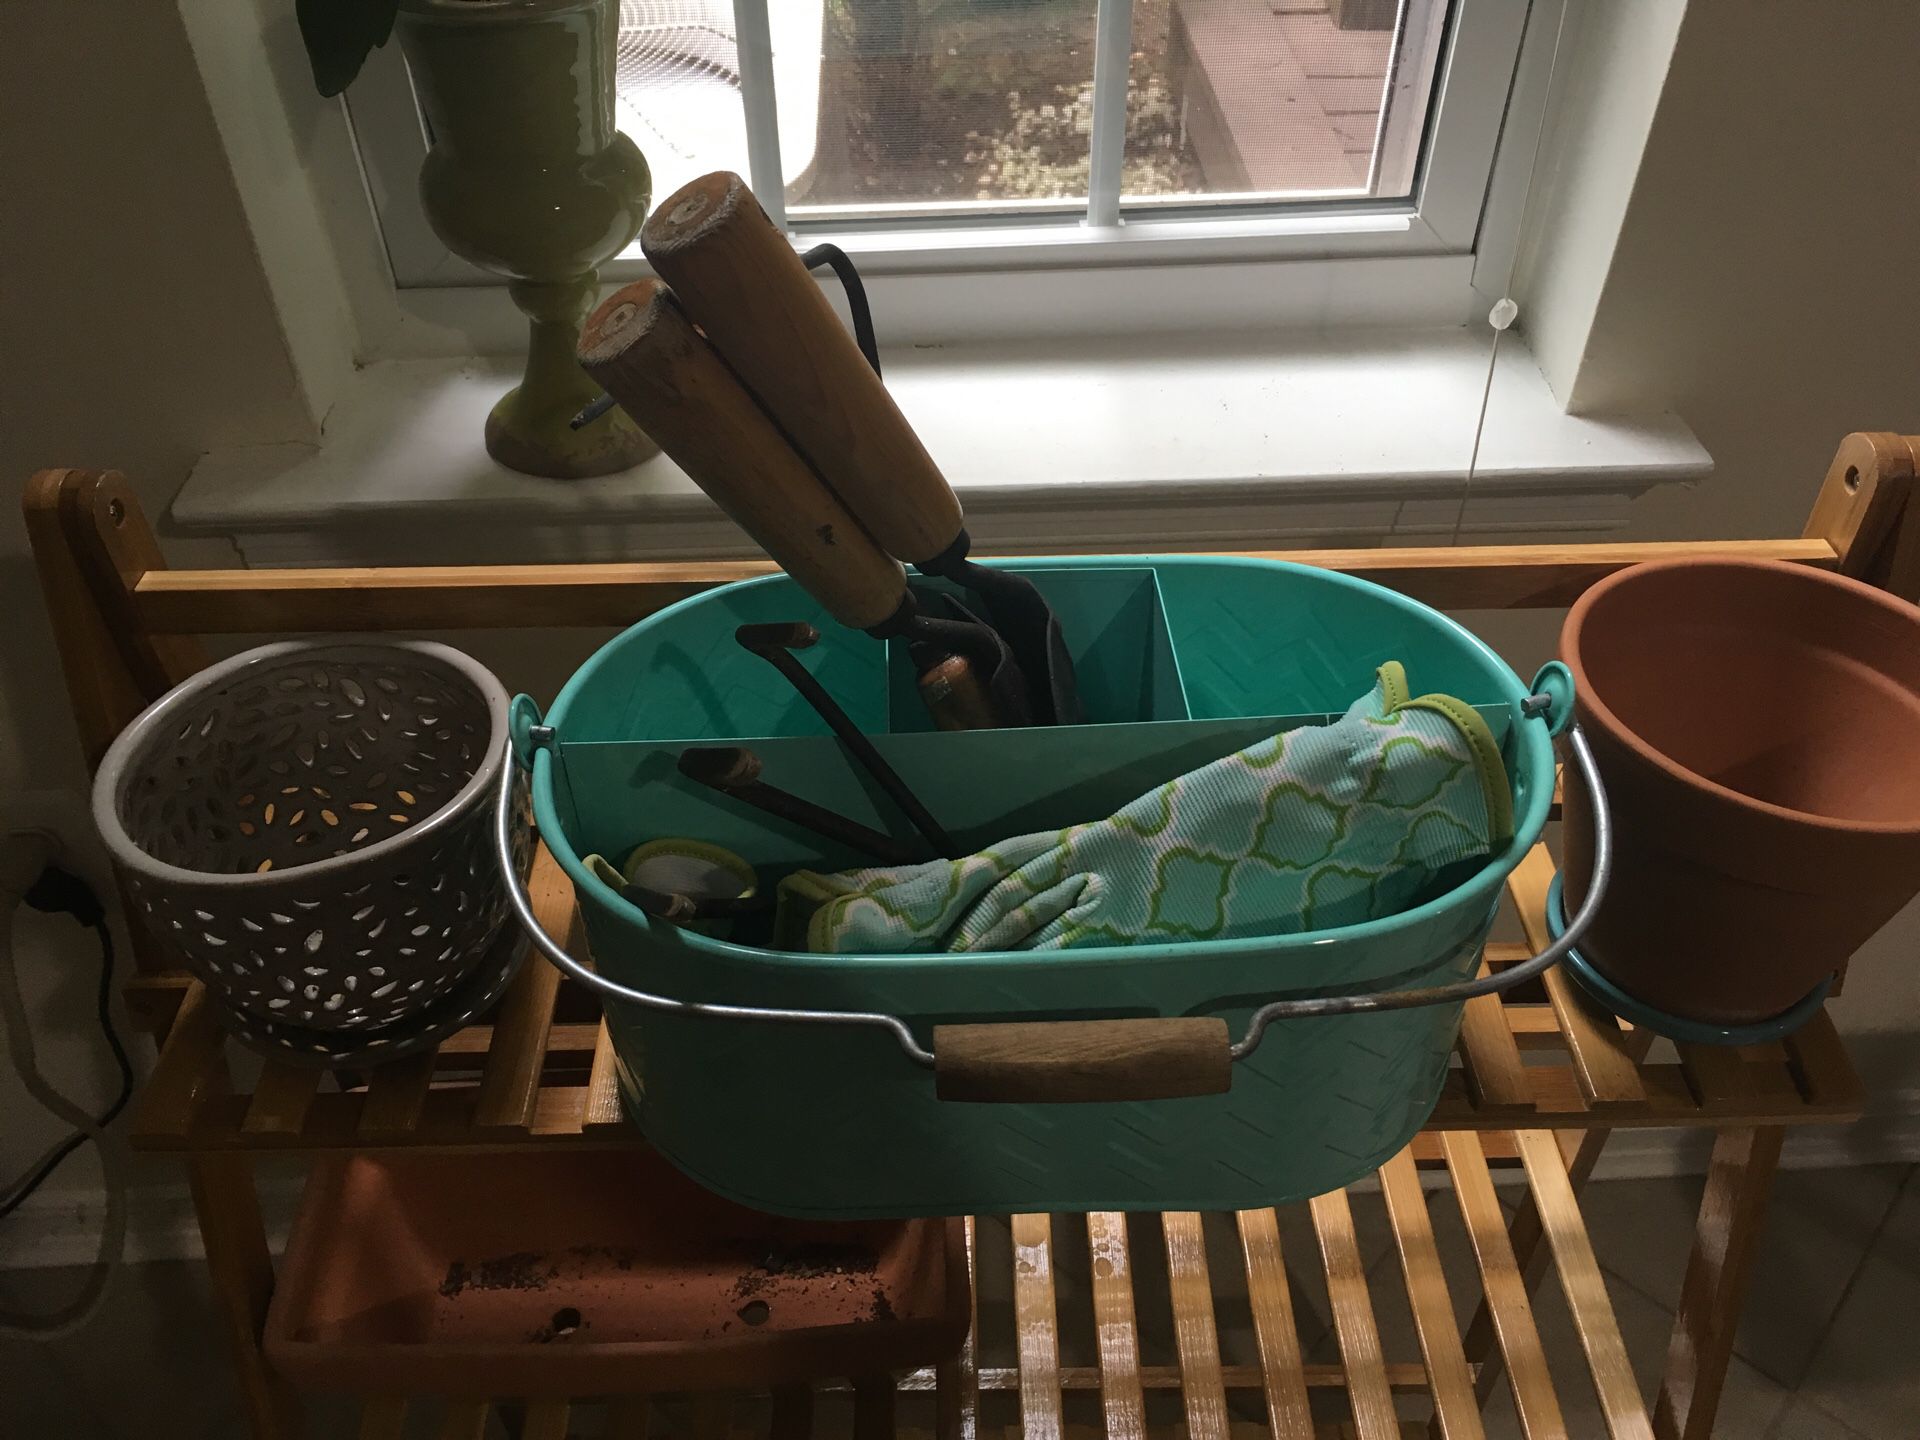 Gardening set: tools and gloves and 2 flower pots